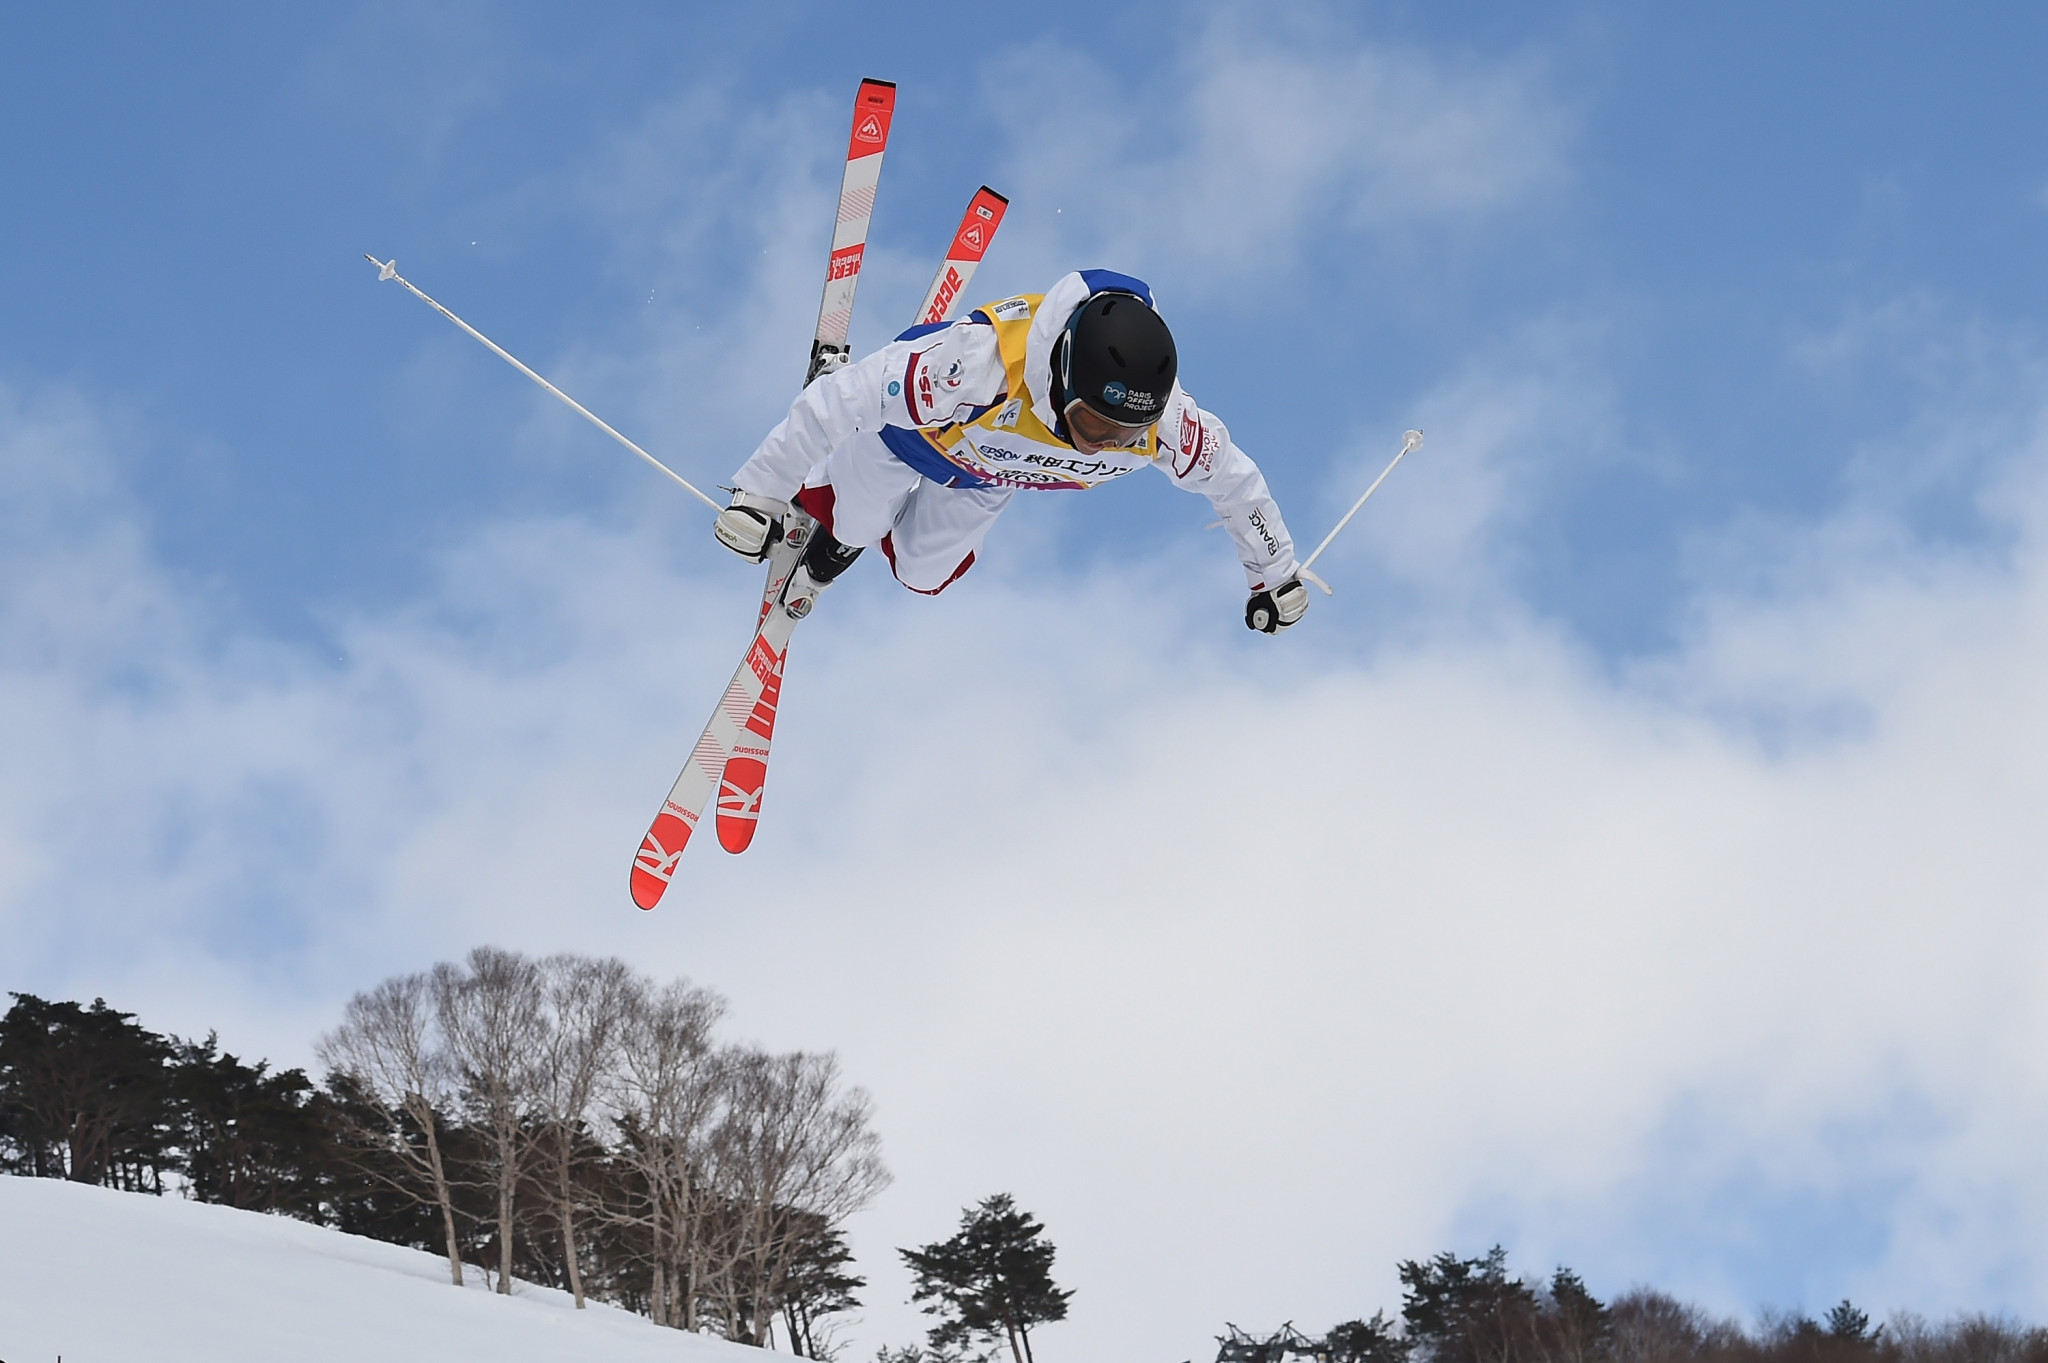 Laffont bidding to seal defence of women's overall title with FIS Moguls World Cup set to conclude in Kazakhstan